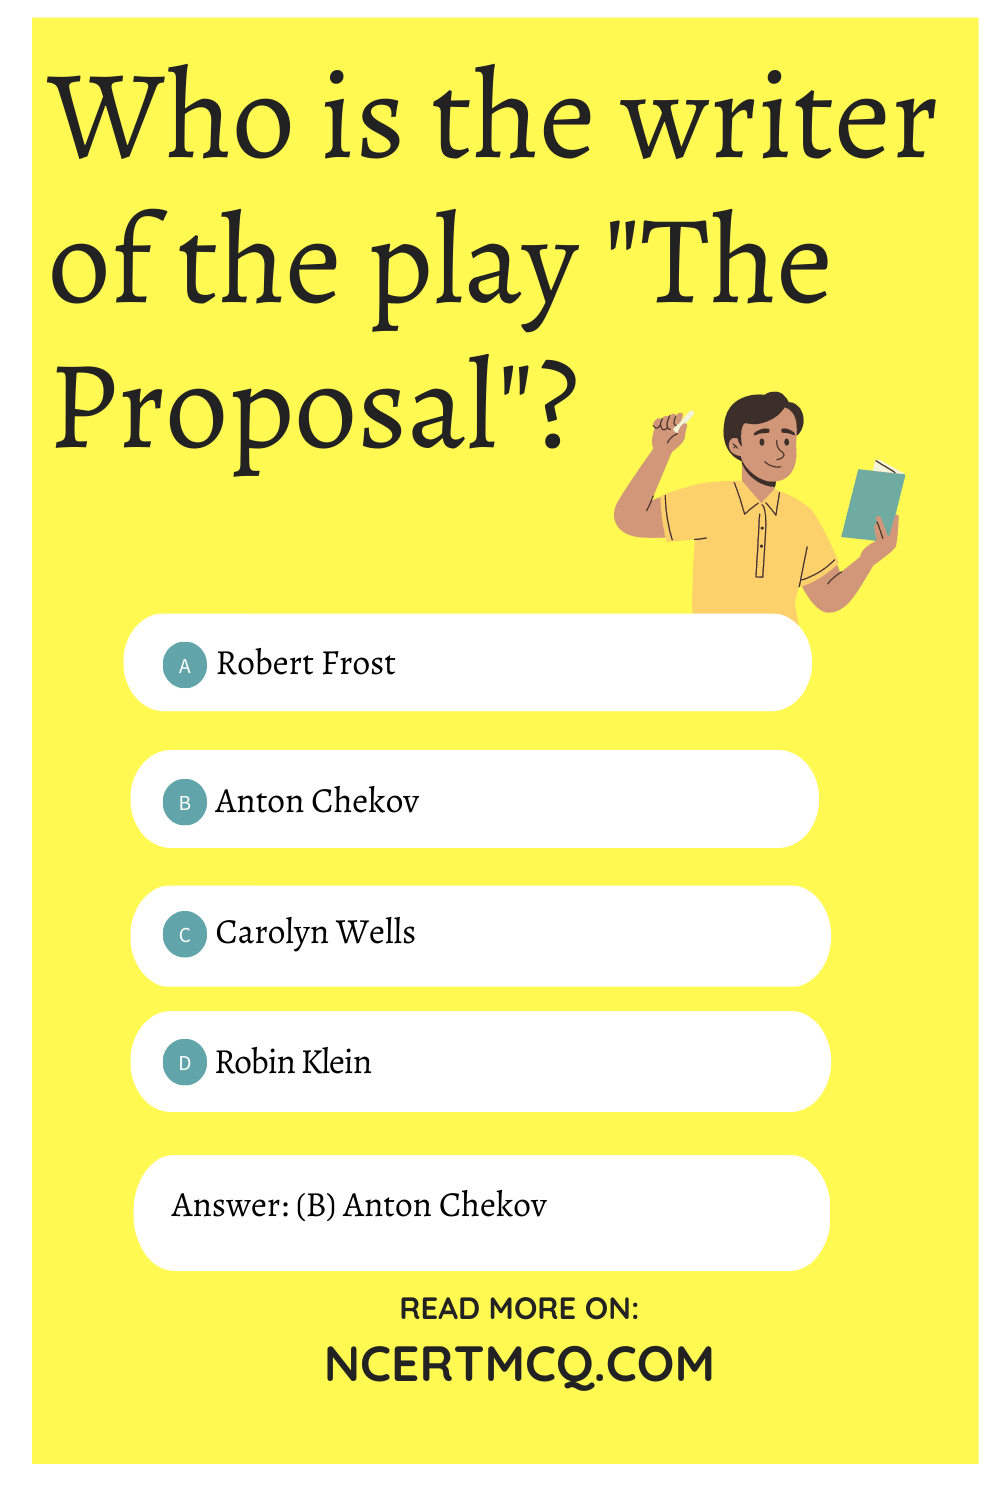 Who is the writer of the play "The Proposal"?